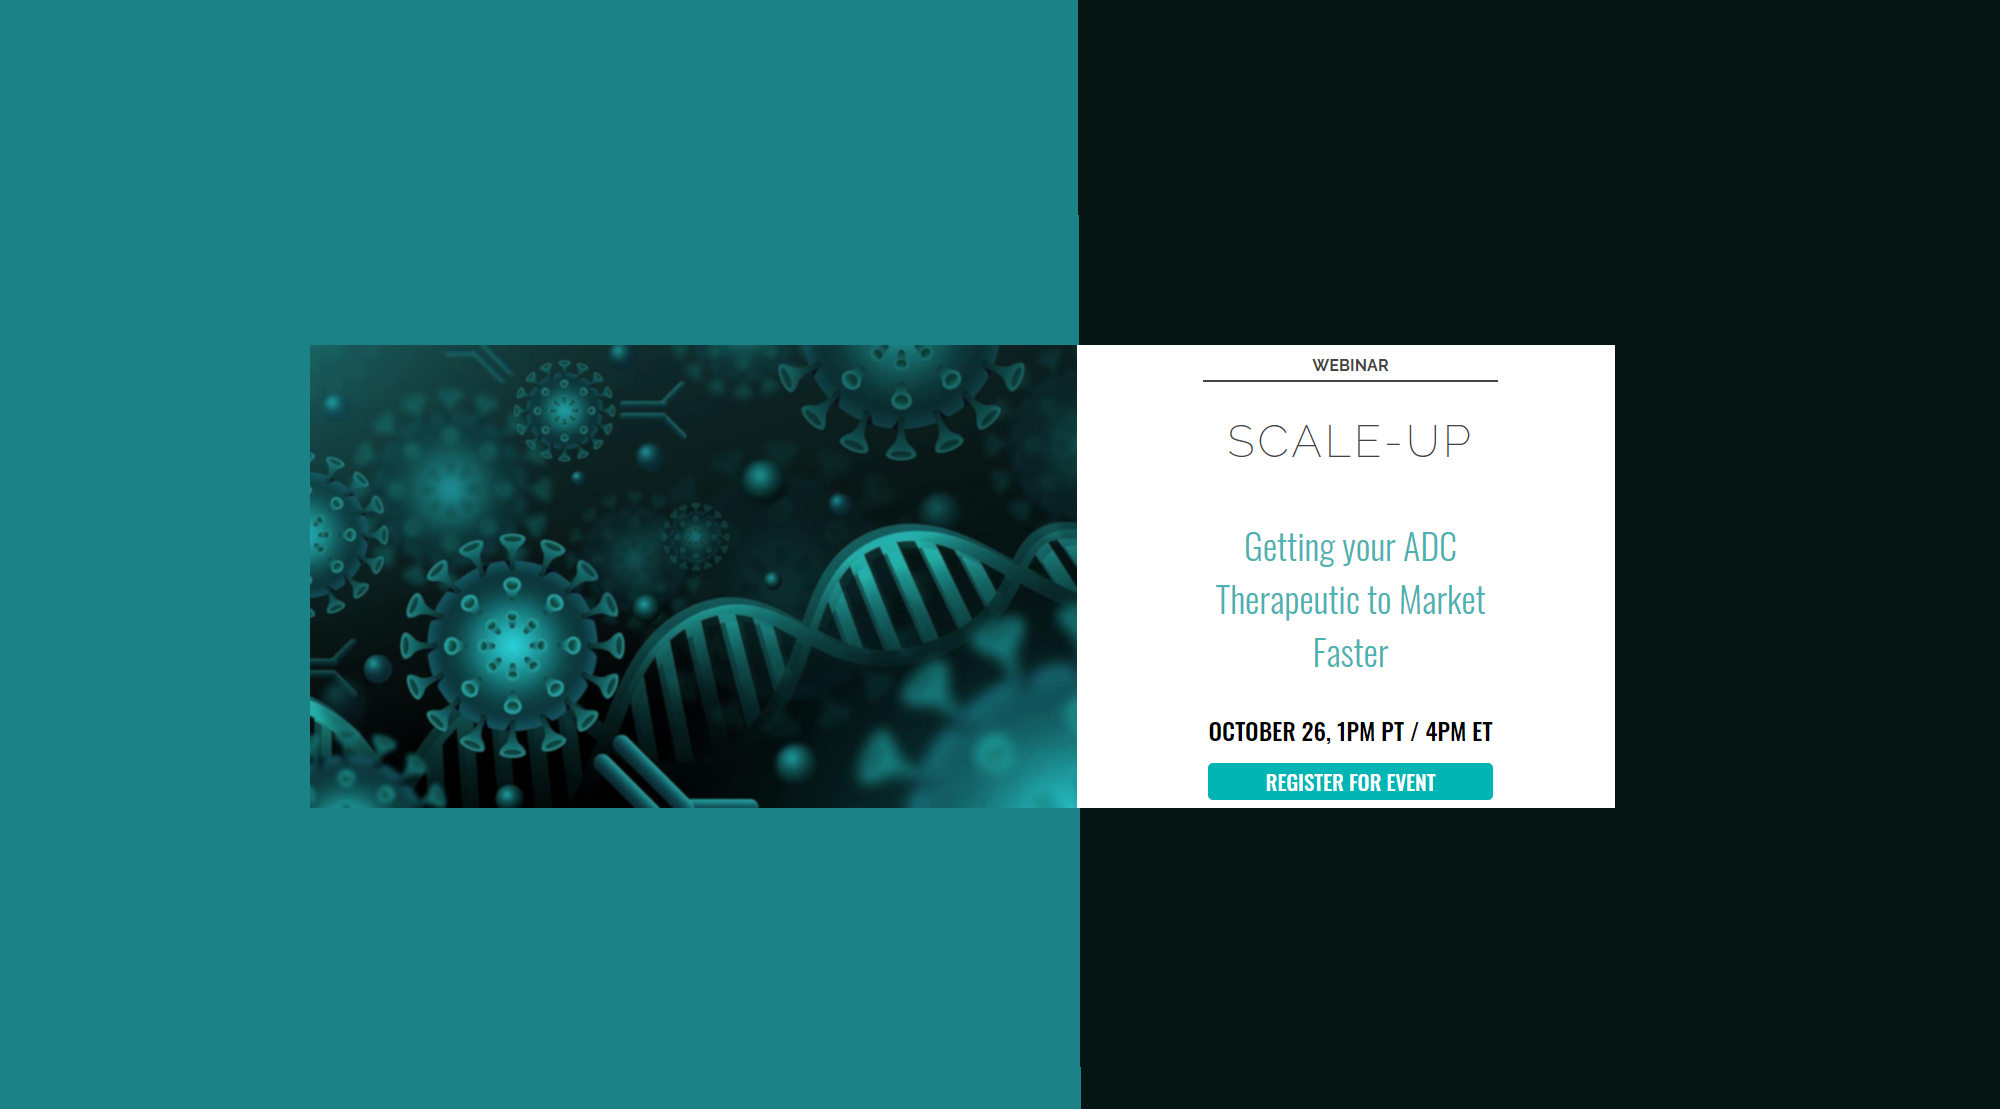 Scale-up: Getting your ADC Therapeutic to Market Faster